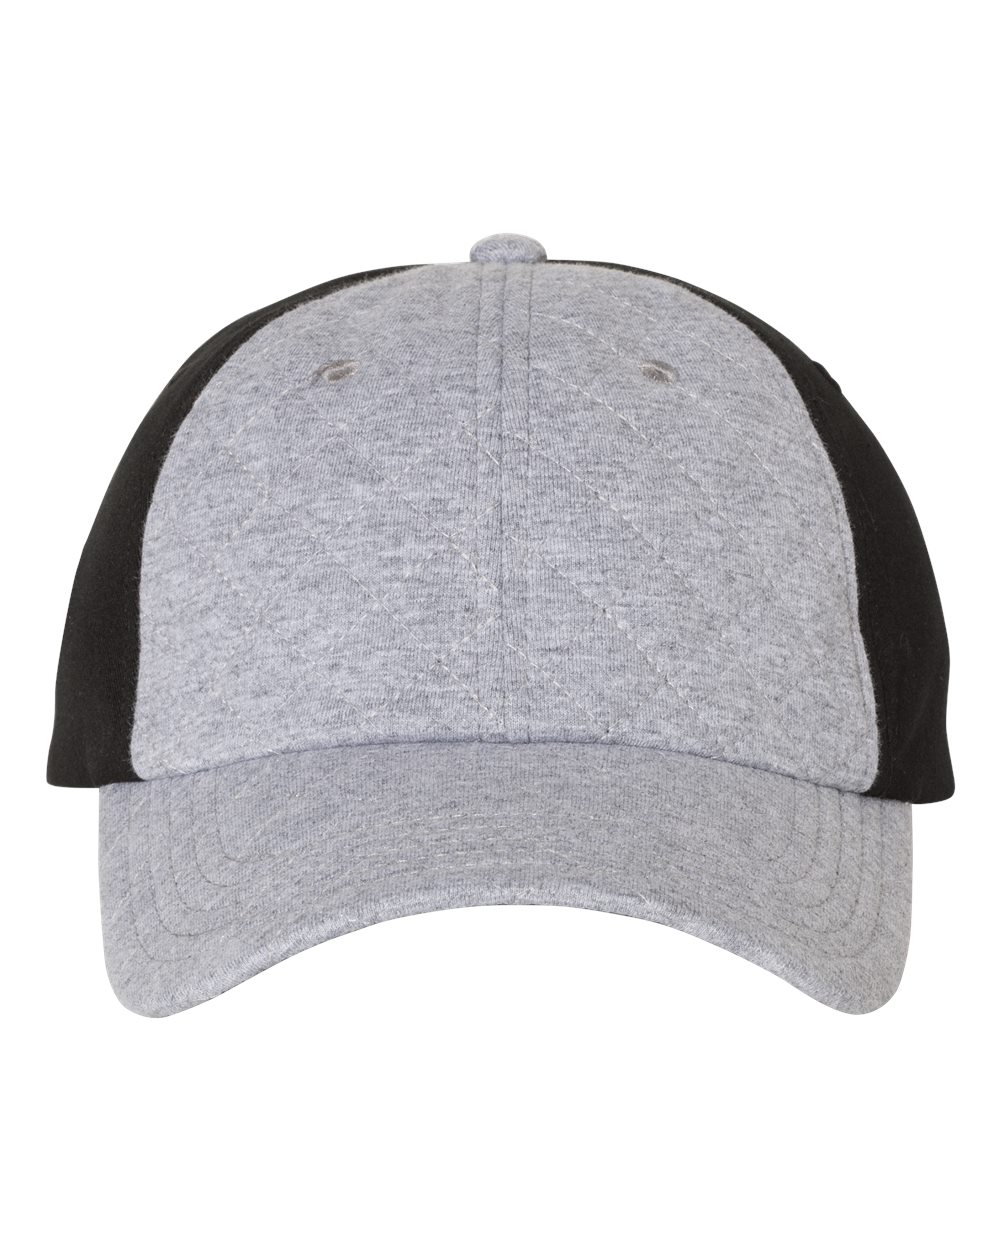 click to view Heather Light Grey/ Black